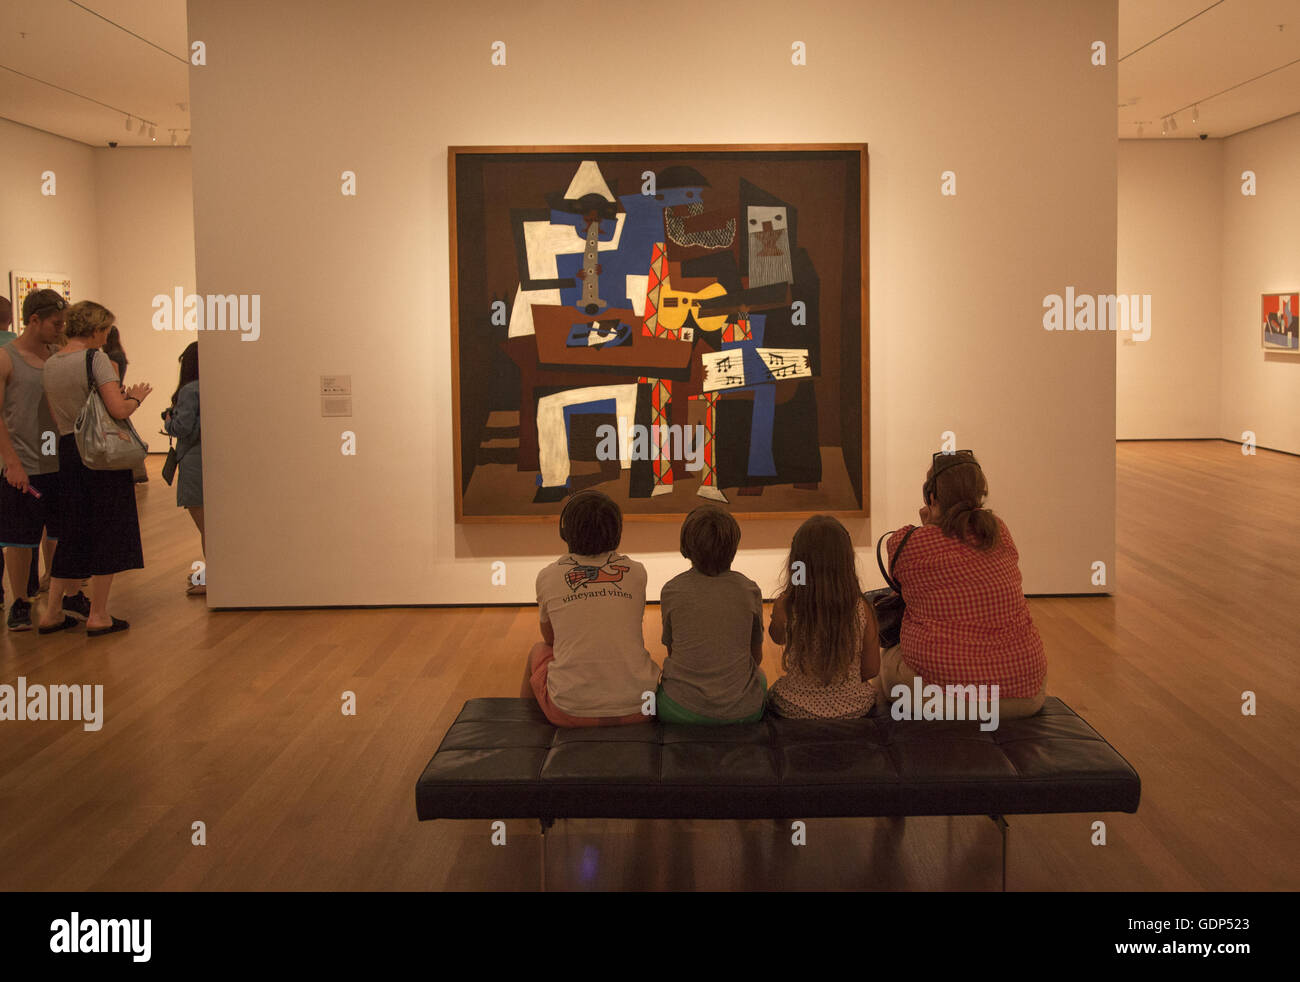 Pablo Picasso, Three Musicians at the Museum of Modern Art, MoMA, in ...